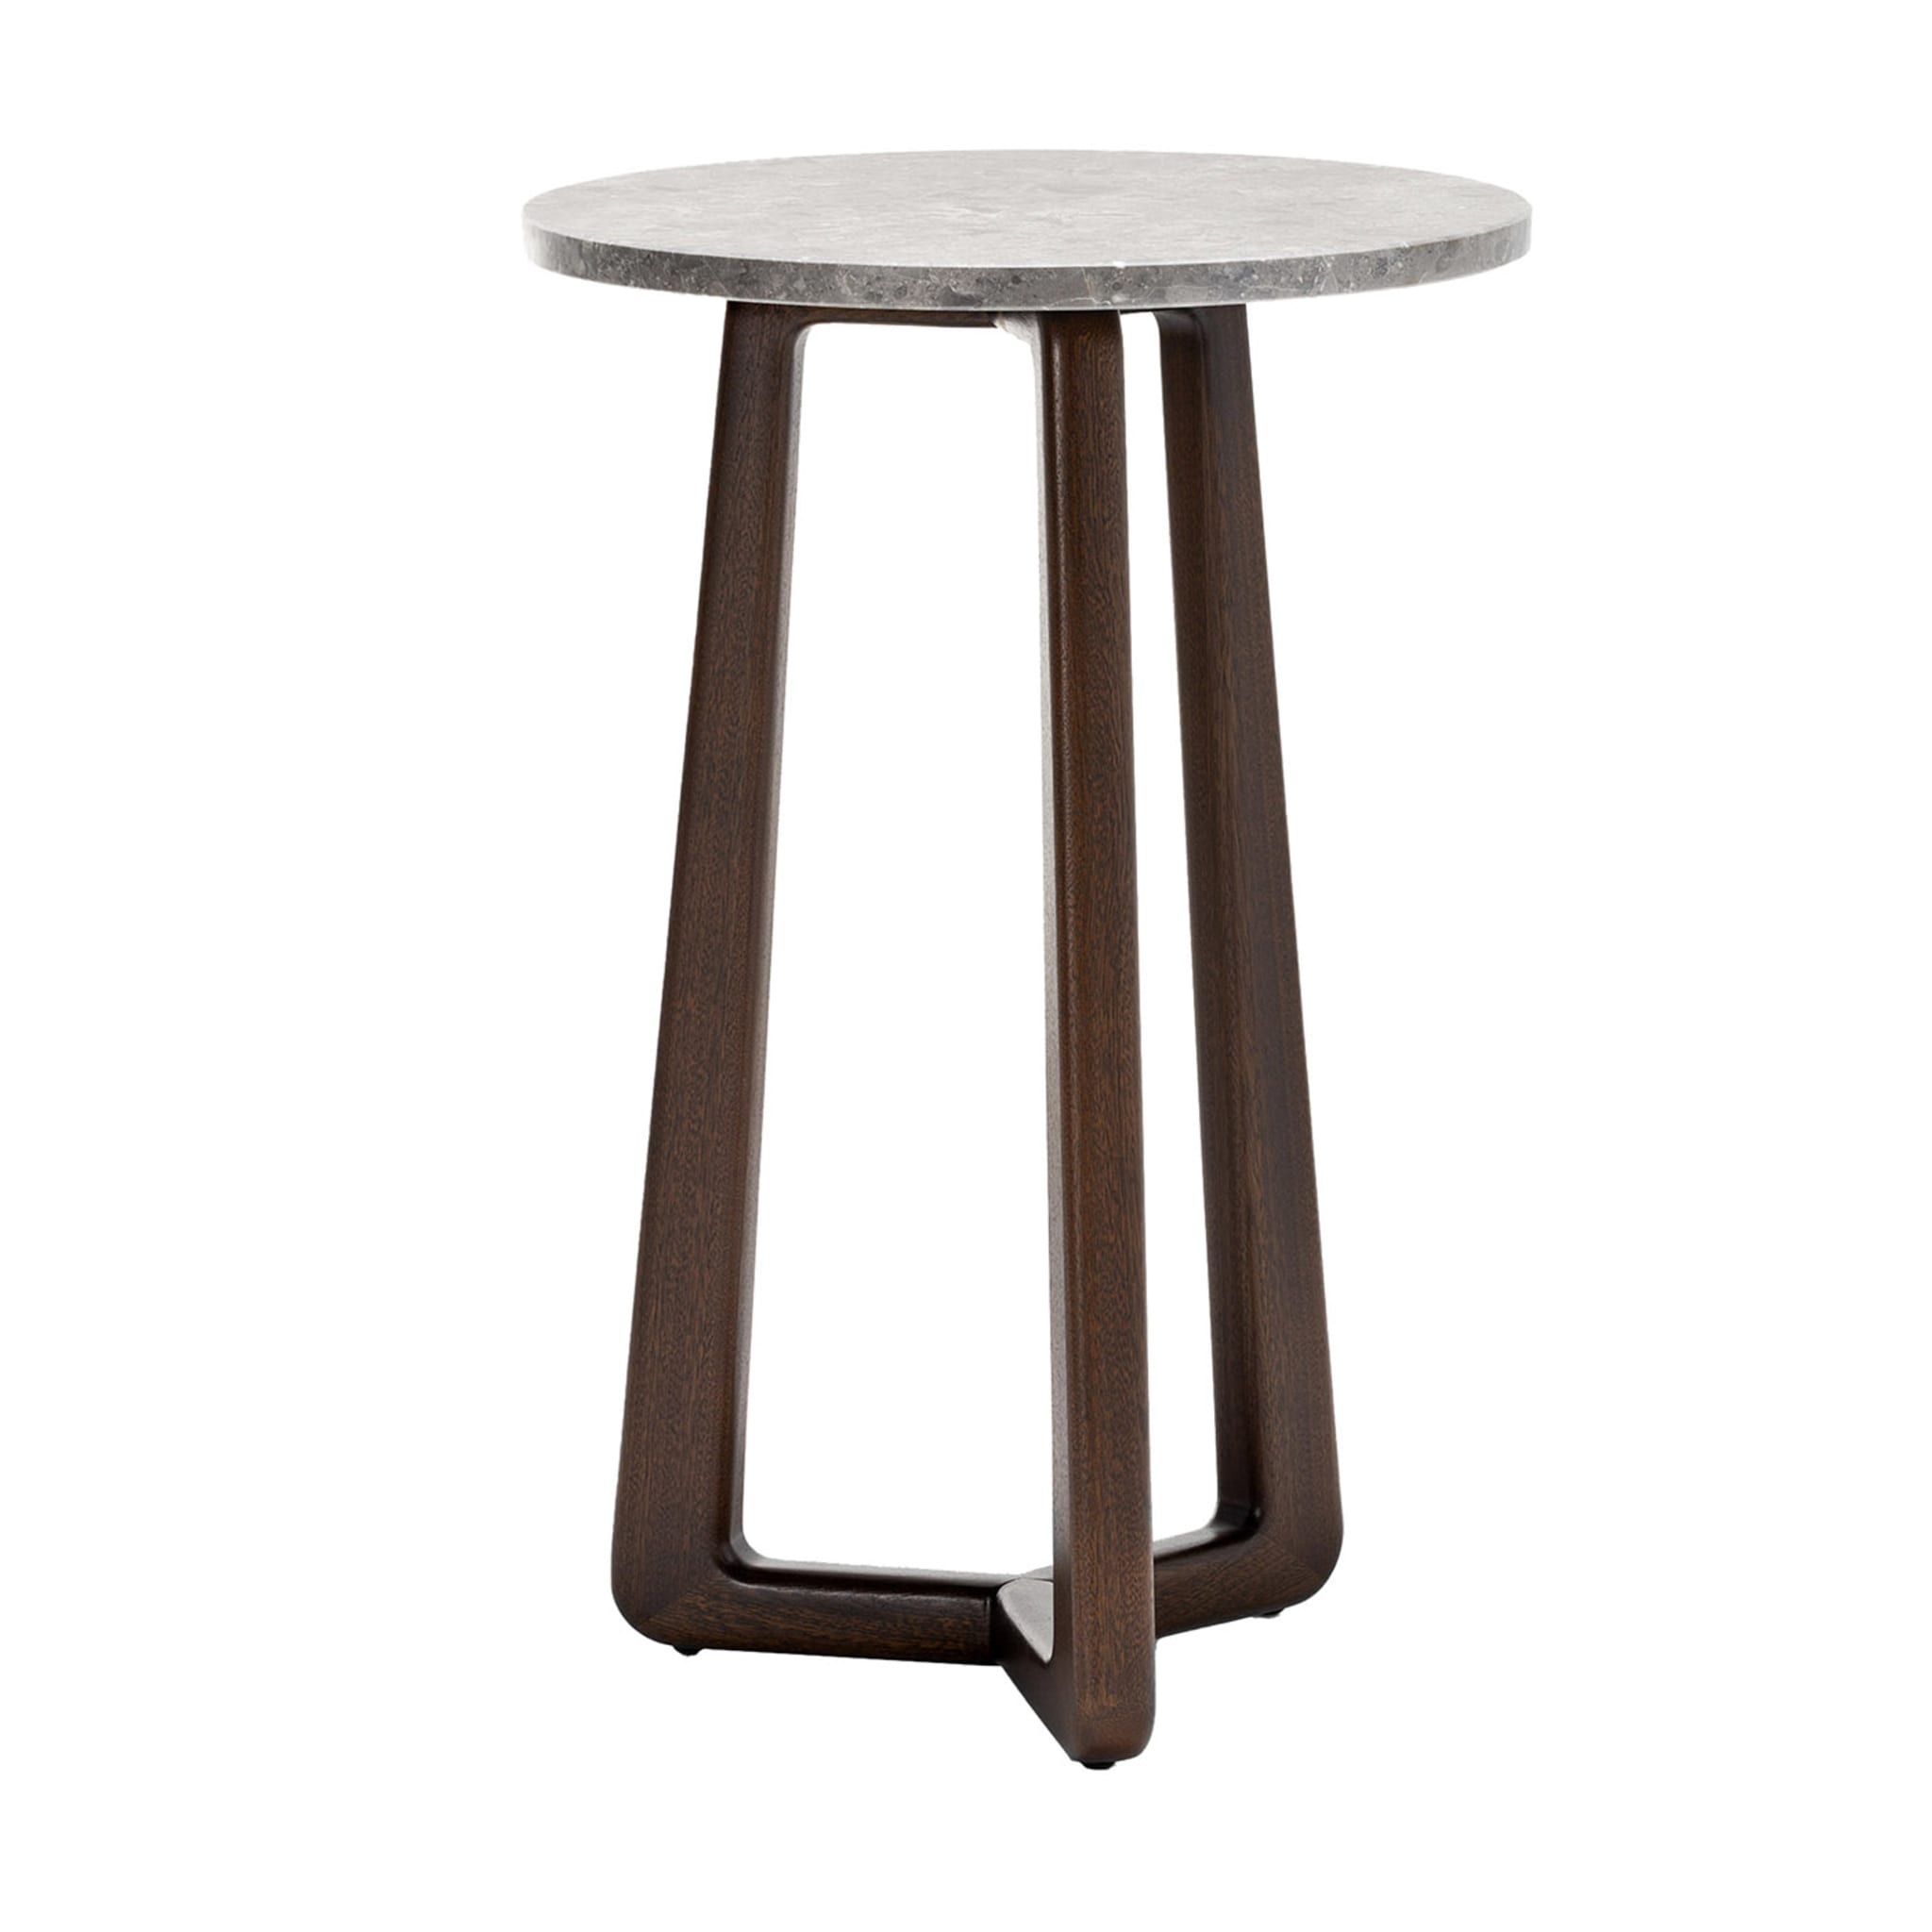 Sunset Tall Sahara Grey Side Table by Paola Navone - Main view